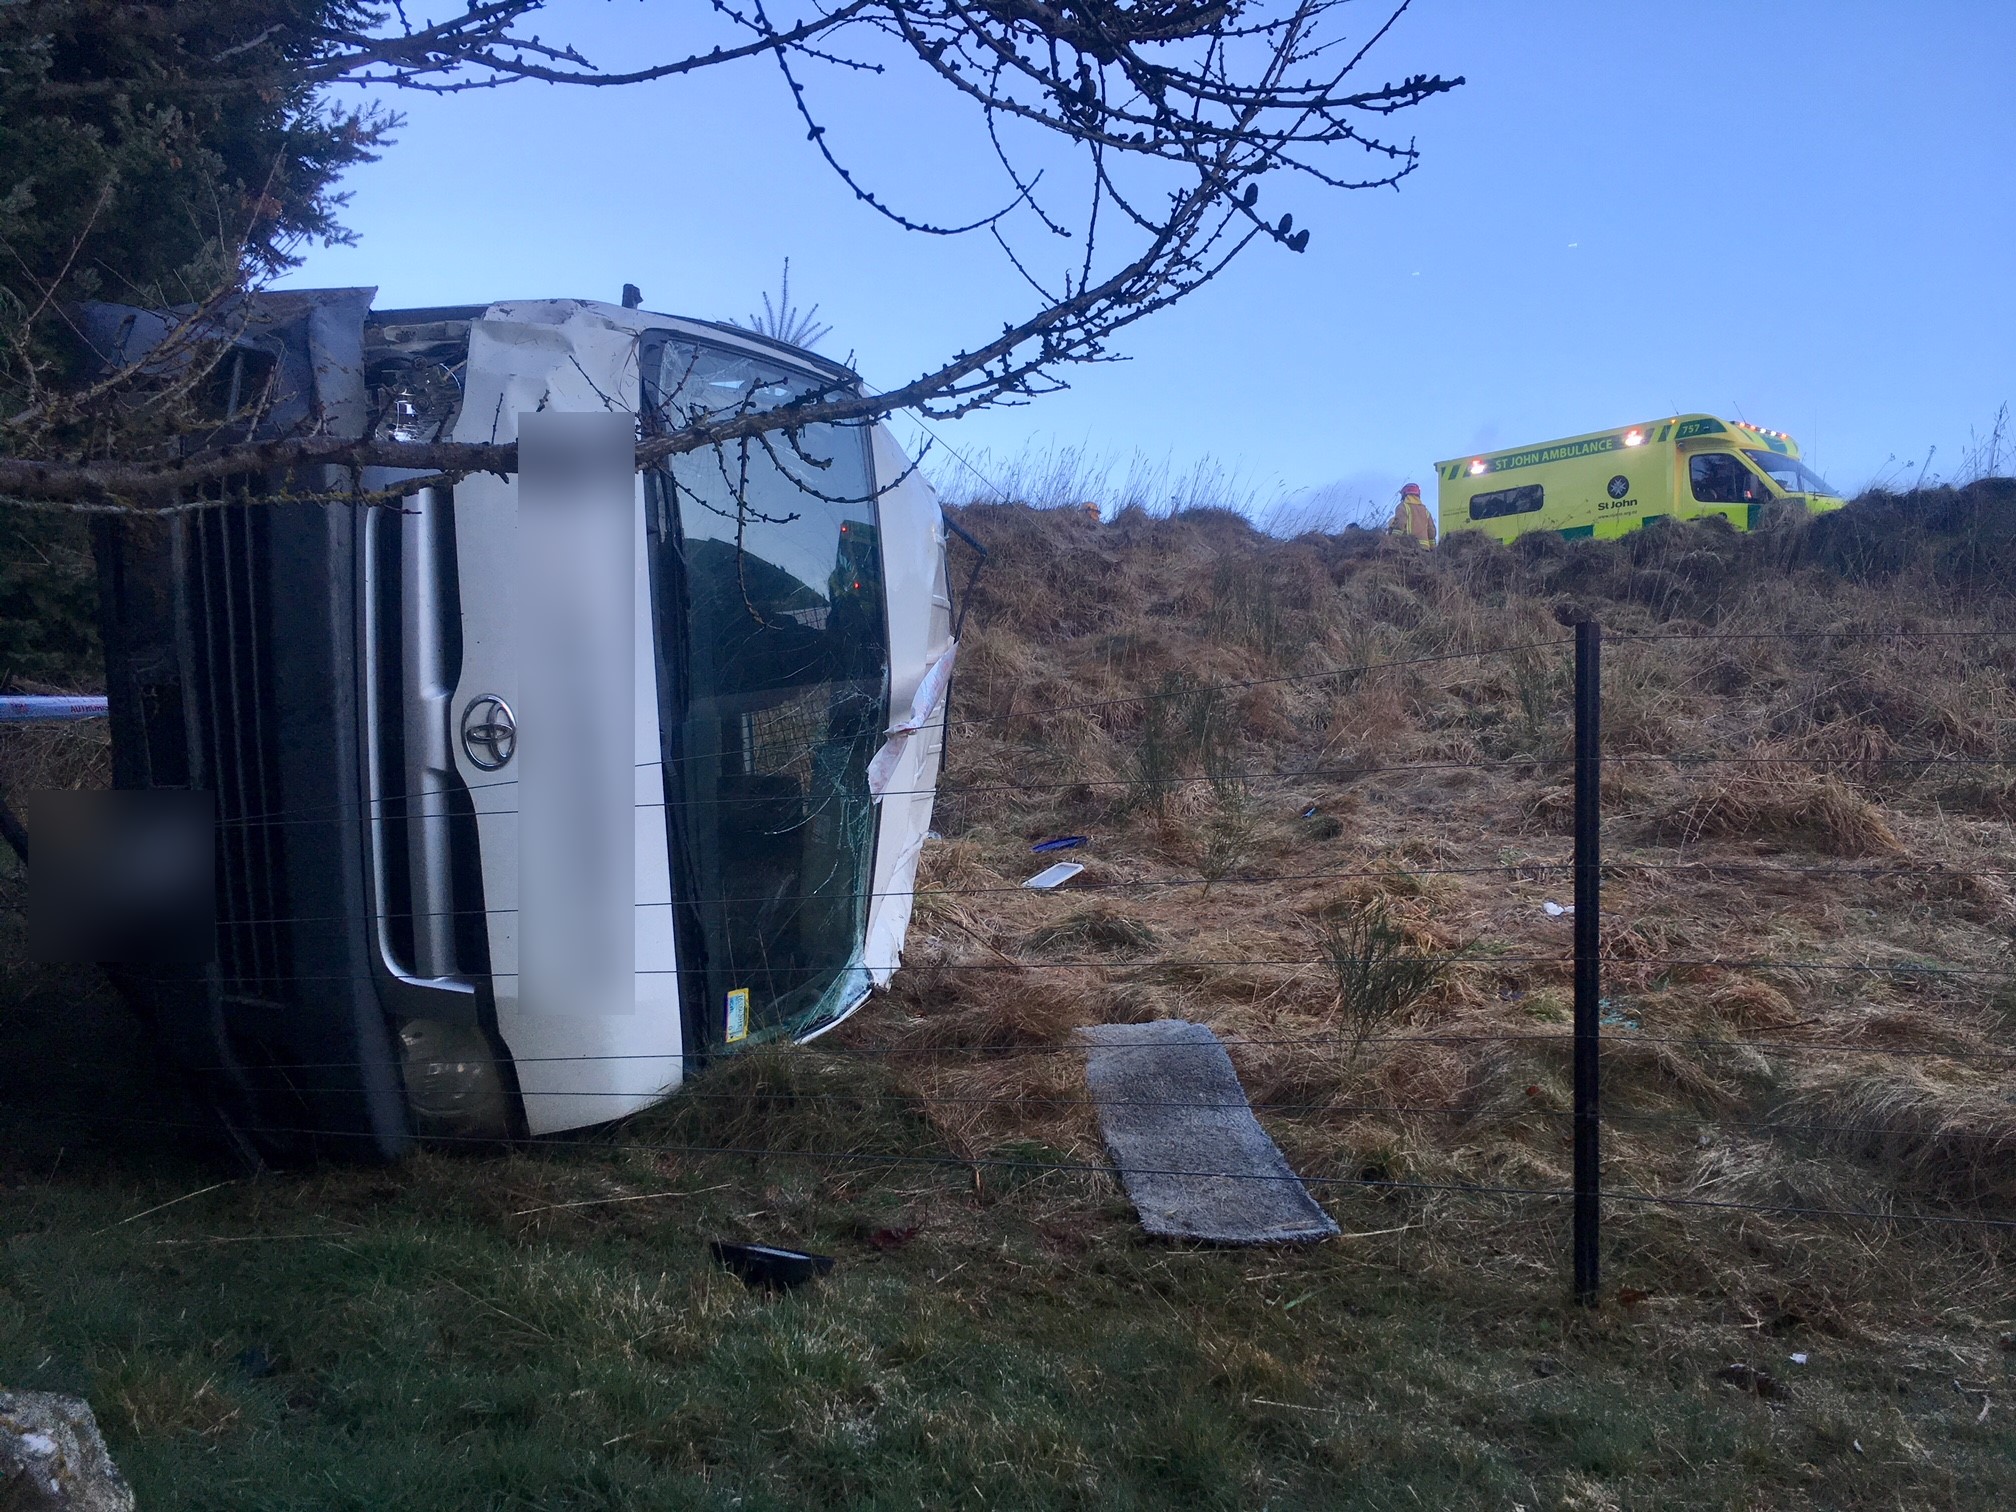 A van carrying shearers ended up on its side after leaving the road near Lee Stream bridge this...